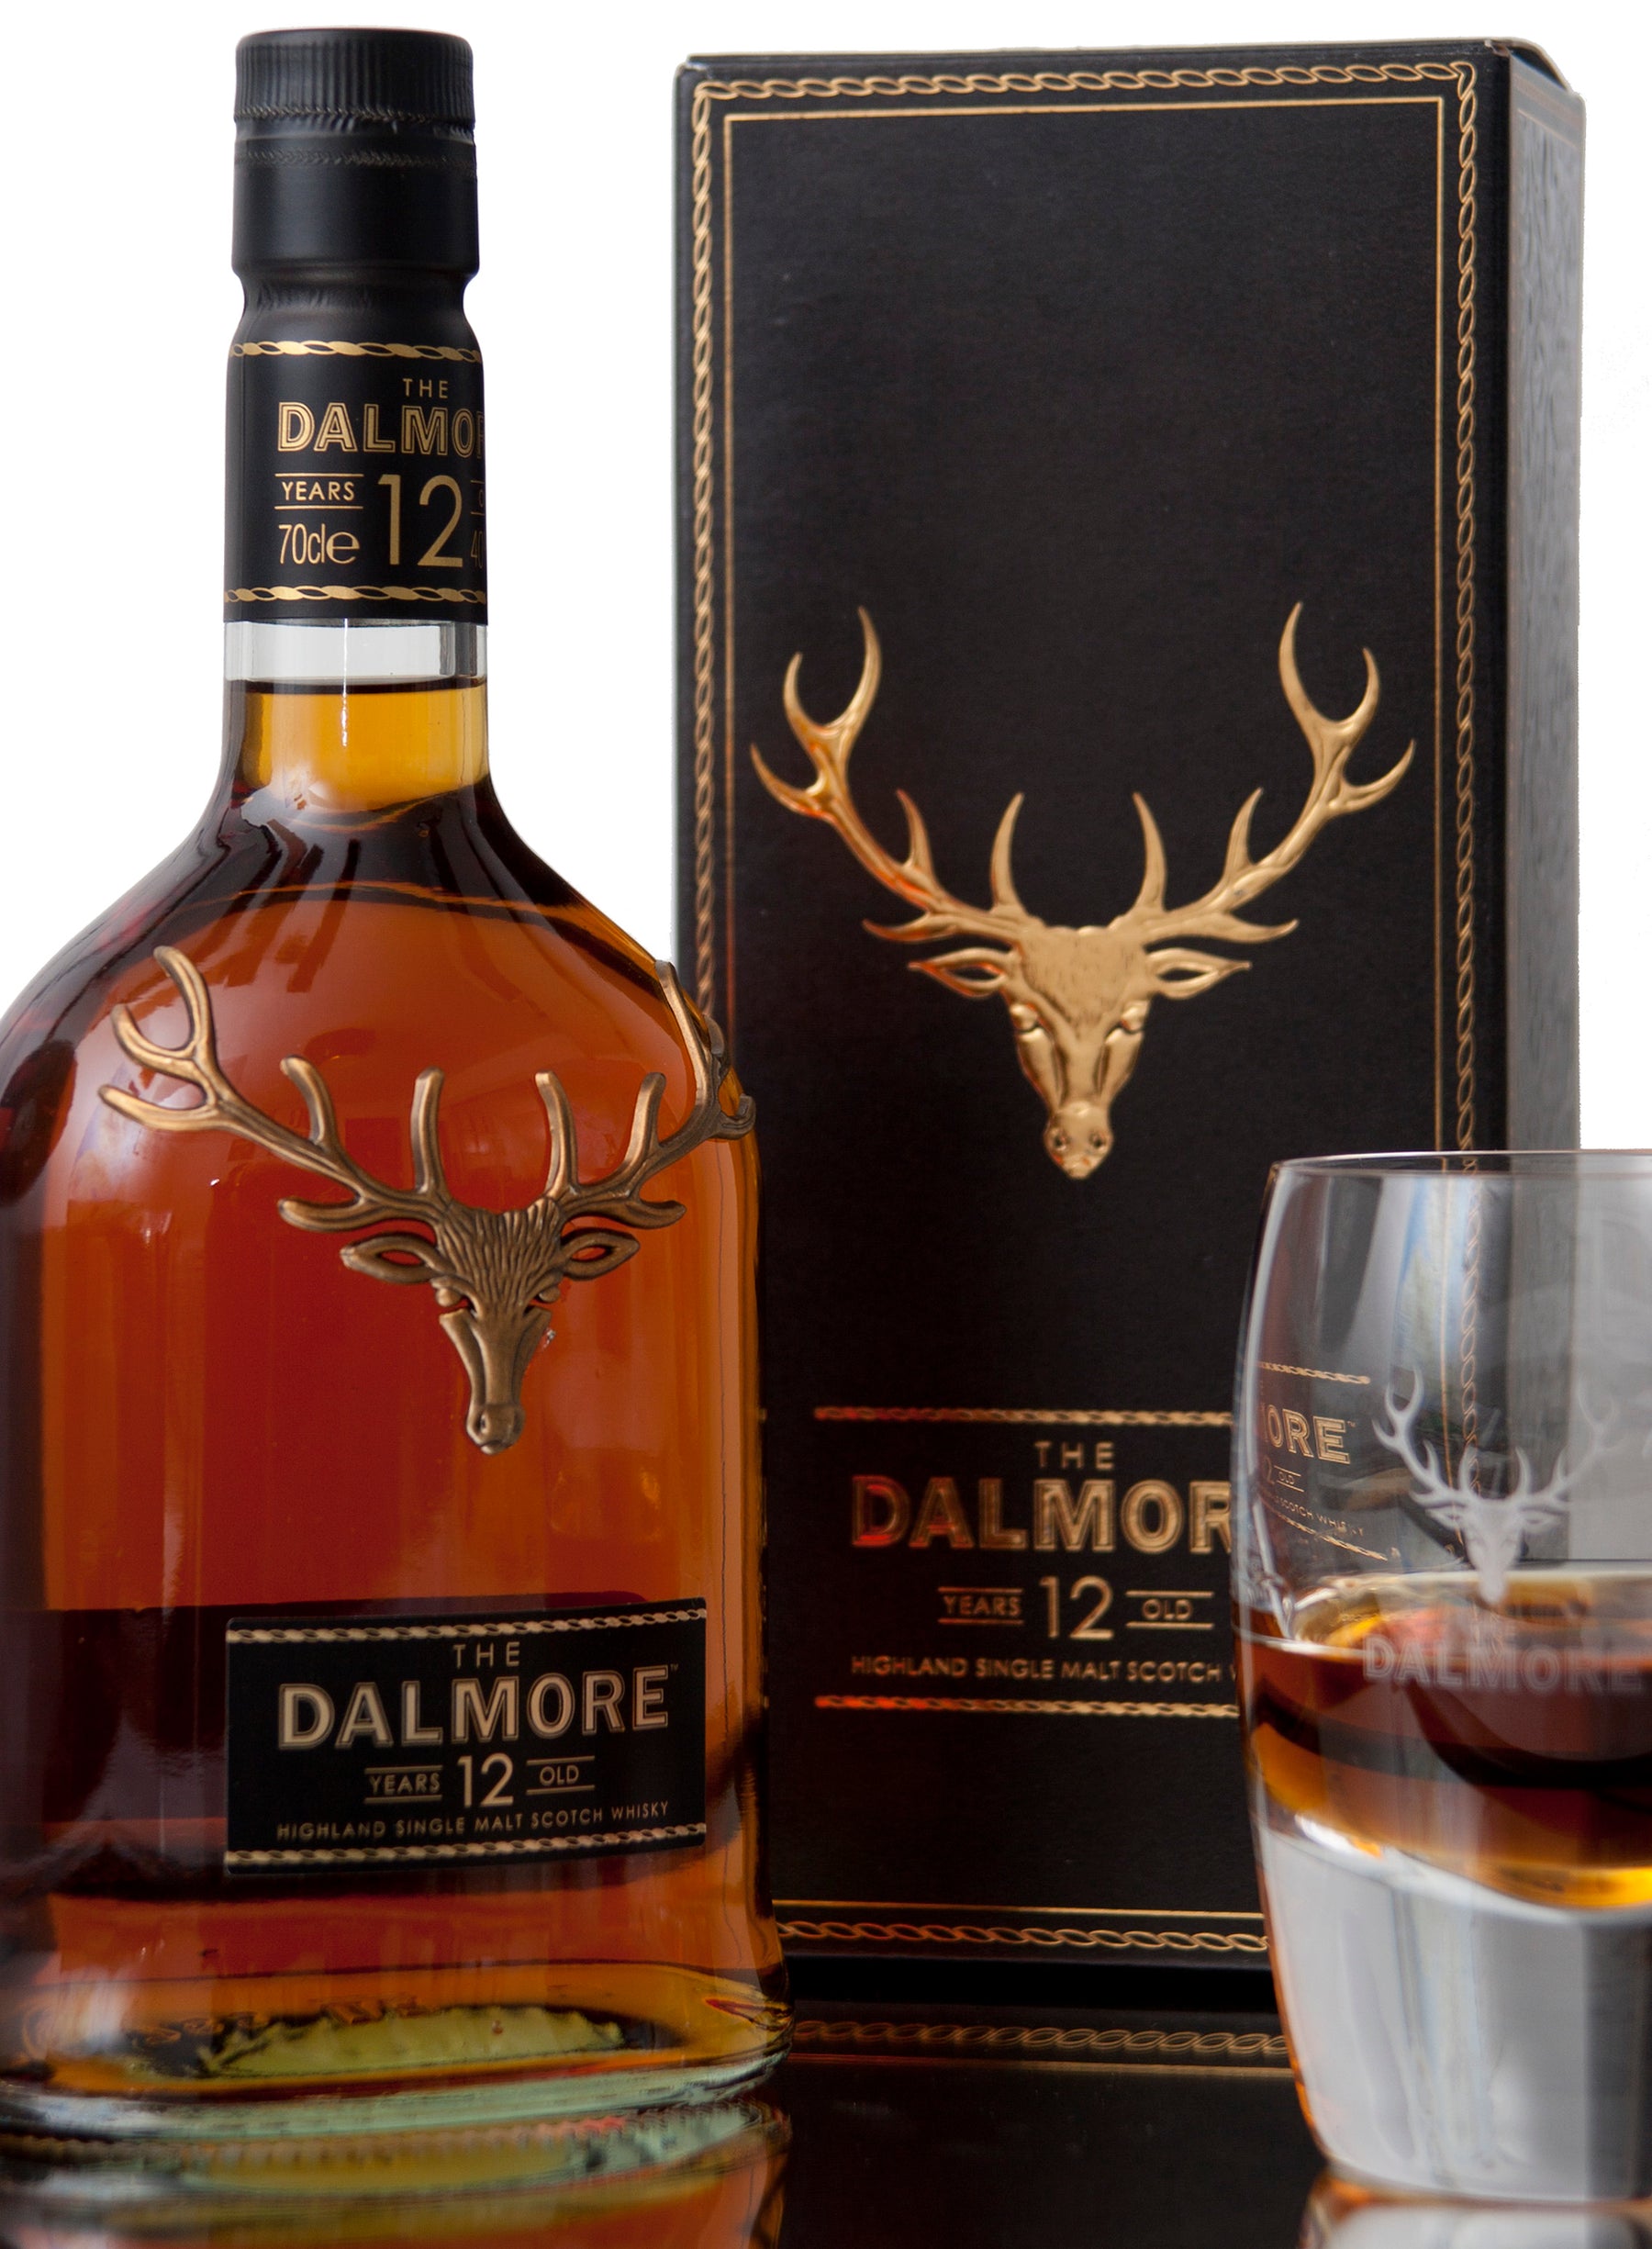 Win a glorious bottle of Dalmore 12 year old